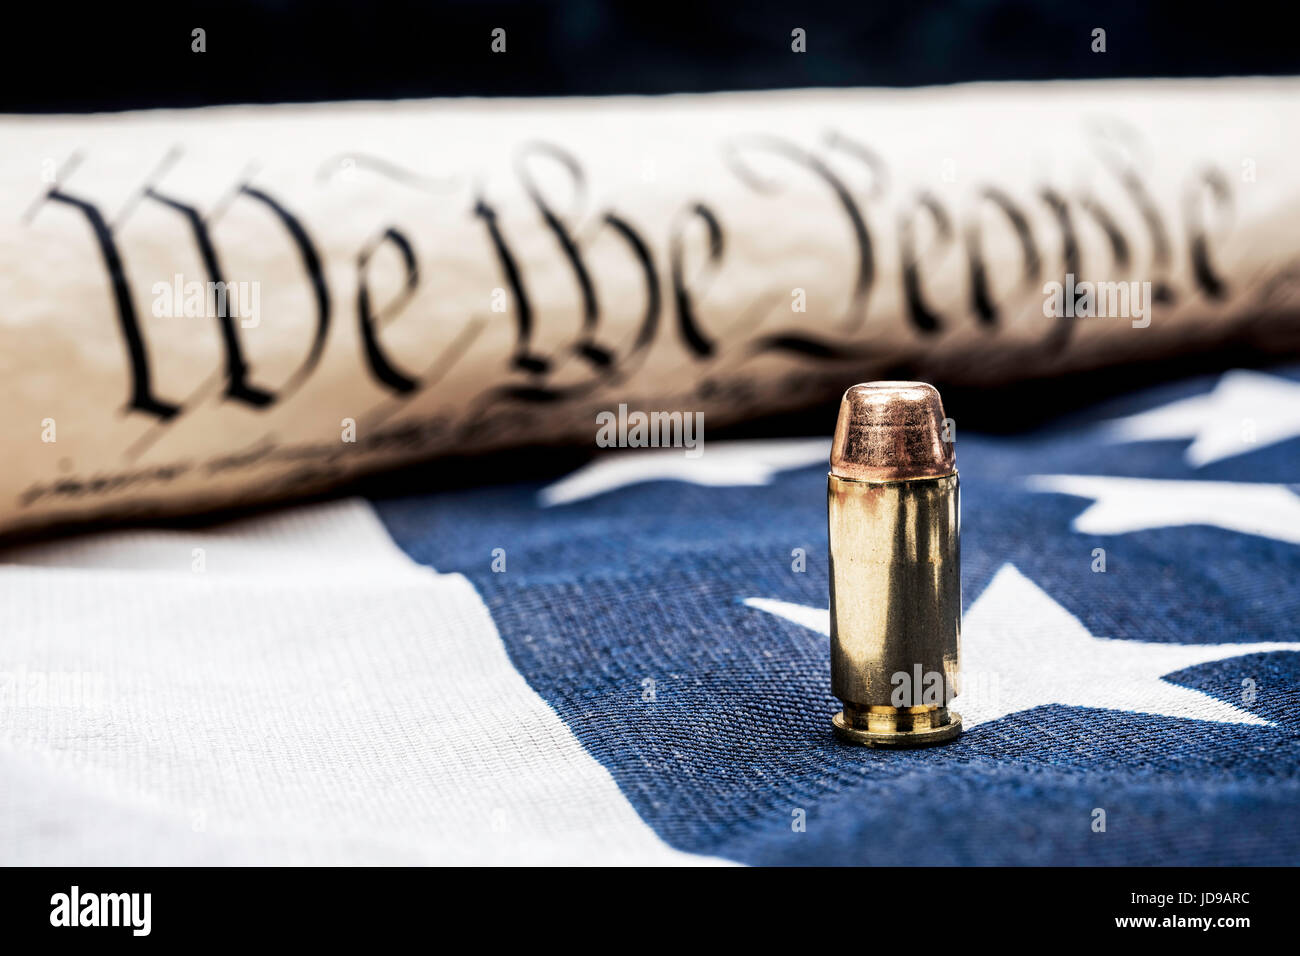 The United States Constitution rolled up next to a bullet rests on an American flag and symbolizes the right to bear arms. Stock Photo